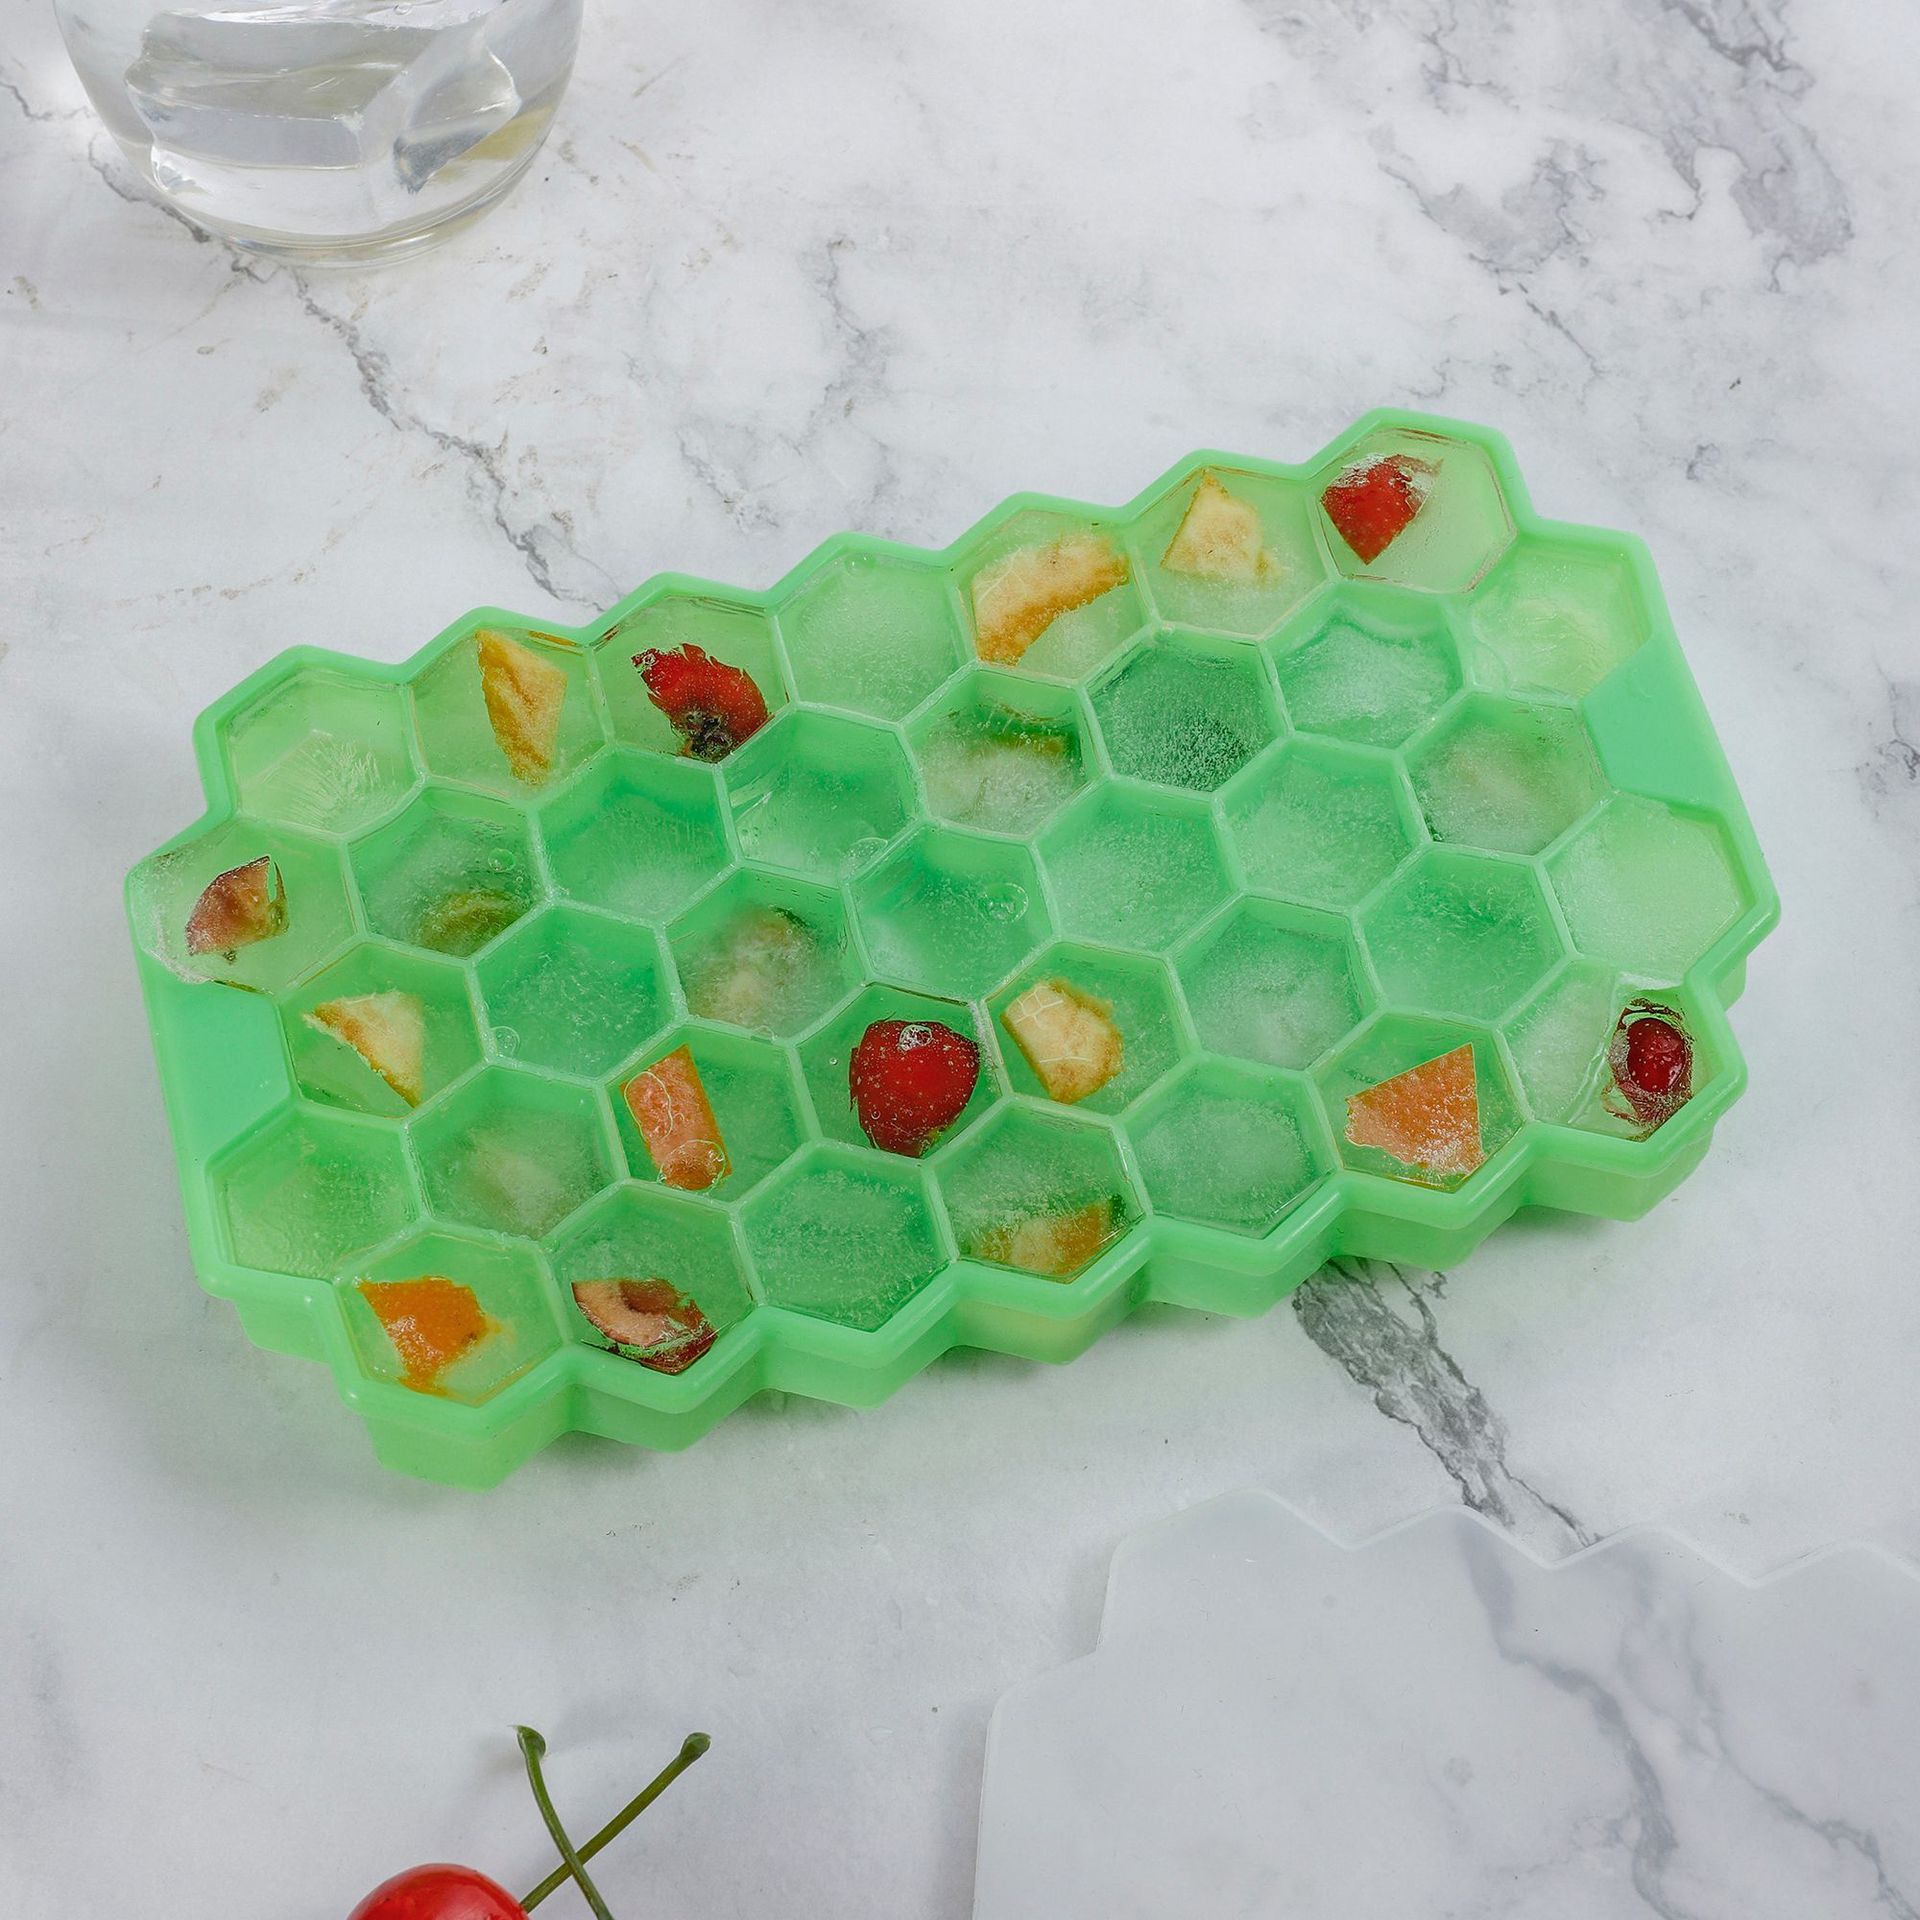 factory wholesale 37 grid silicone ice tray household honeycomb ice tray ice cube mold ice making supplementary food box mold with lid